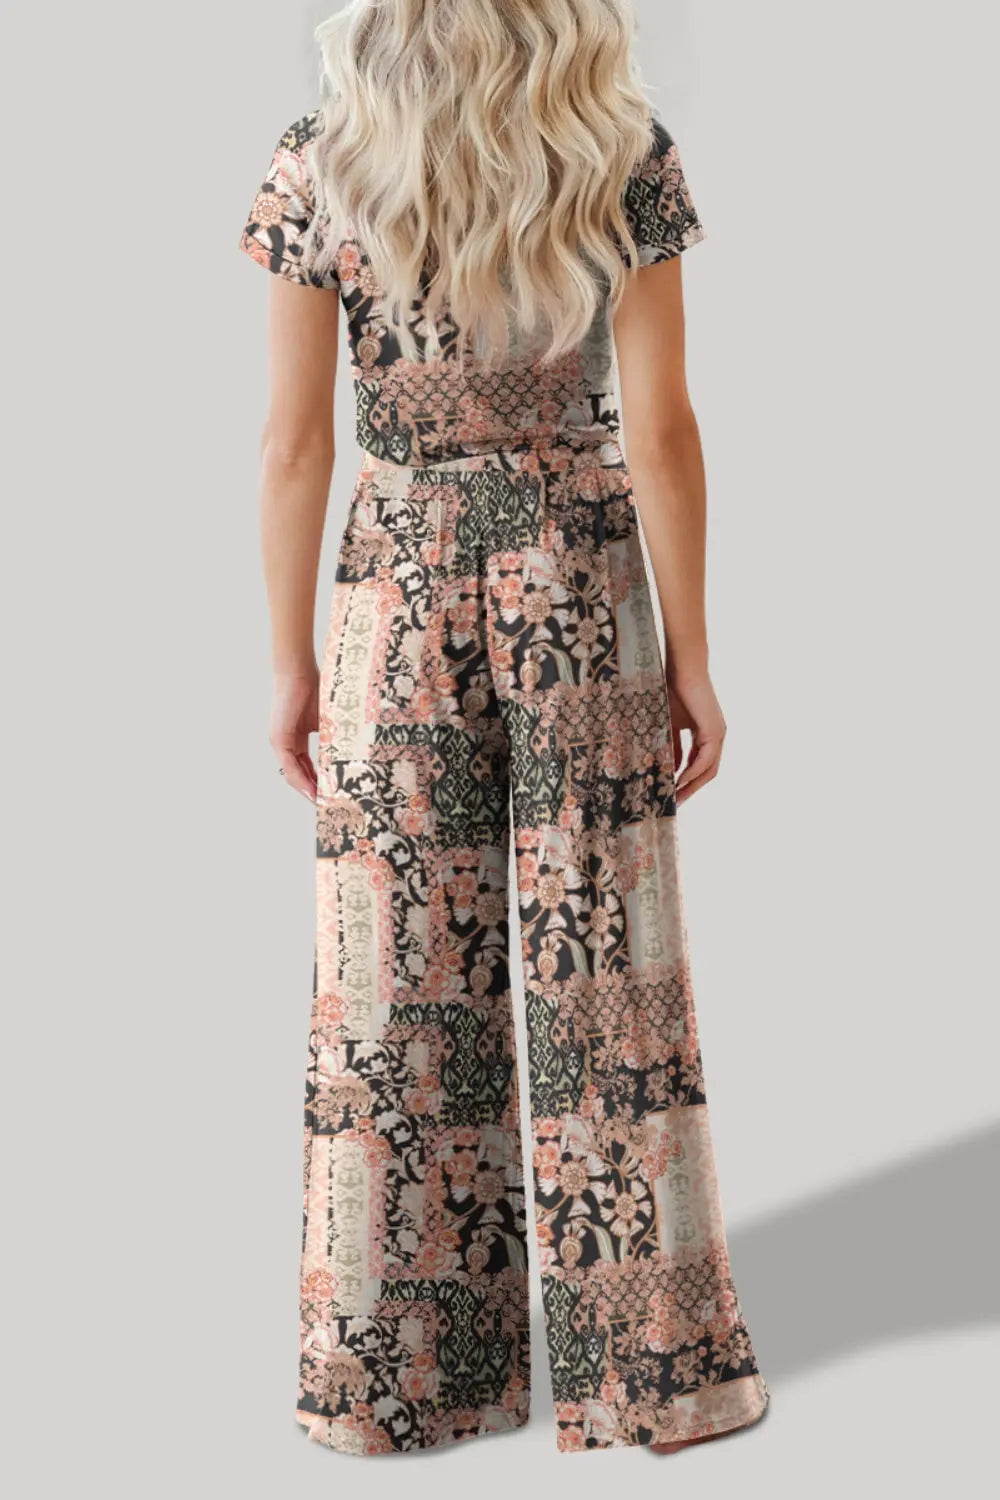 Printed Round Neck Short Sleeve Top and Pants Set Trendsi